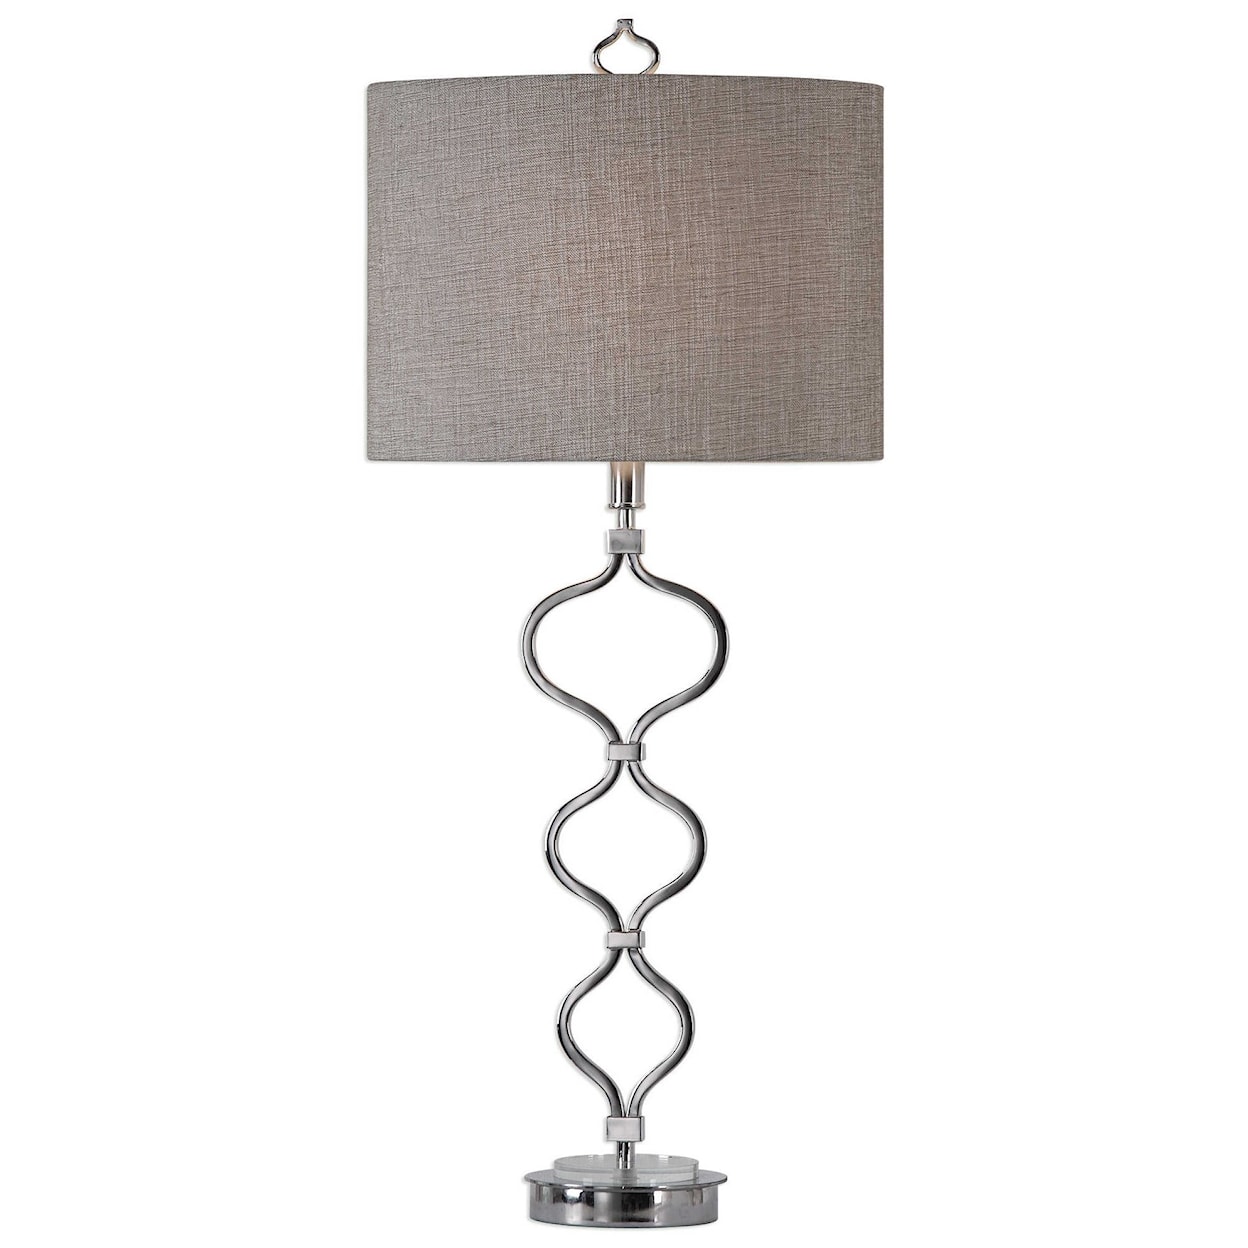 Uttermost Table Lamps Serpico Polished Nickel Table Lamp